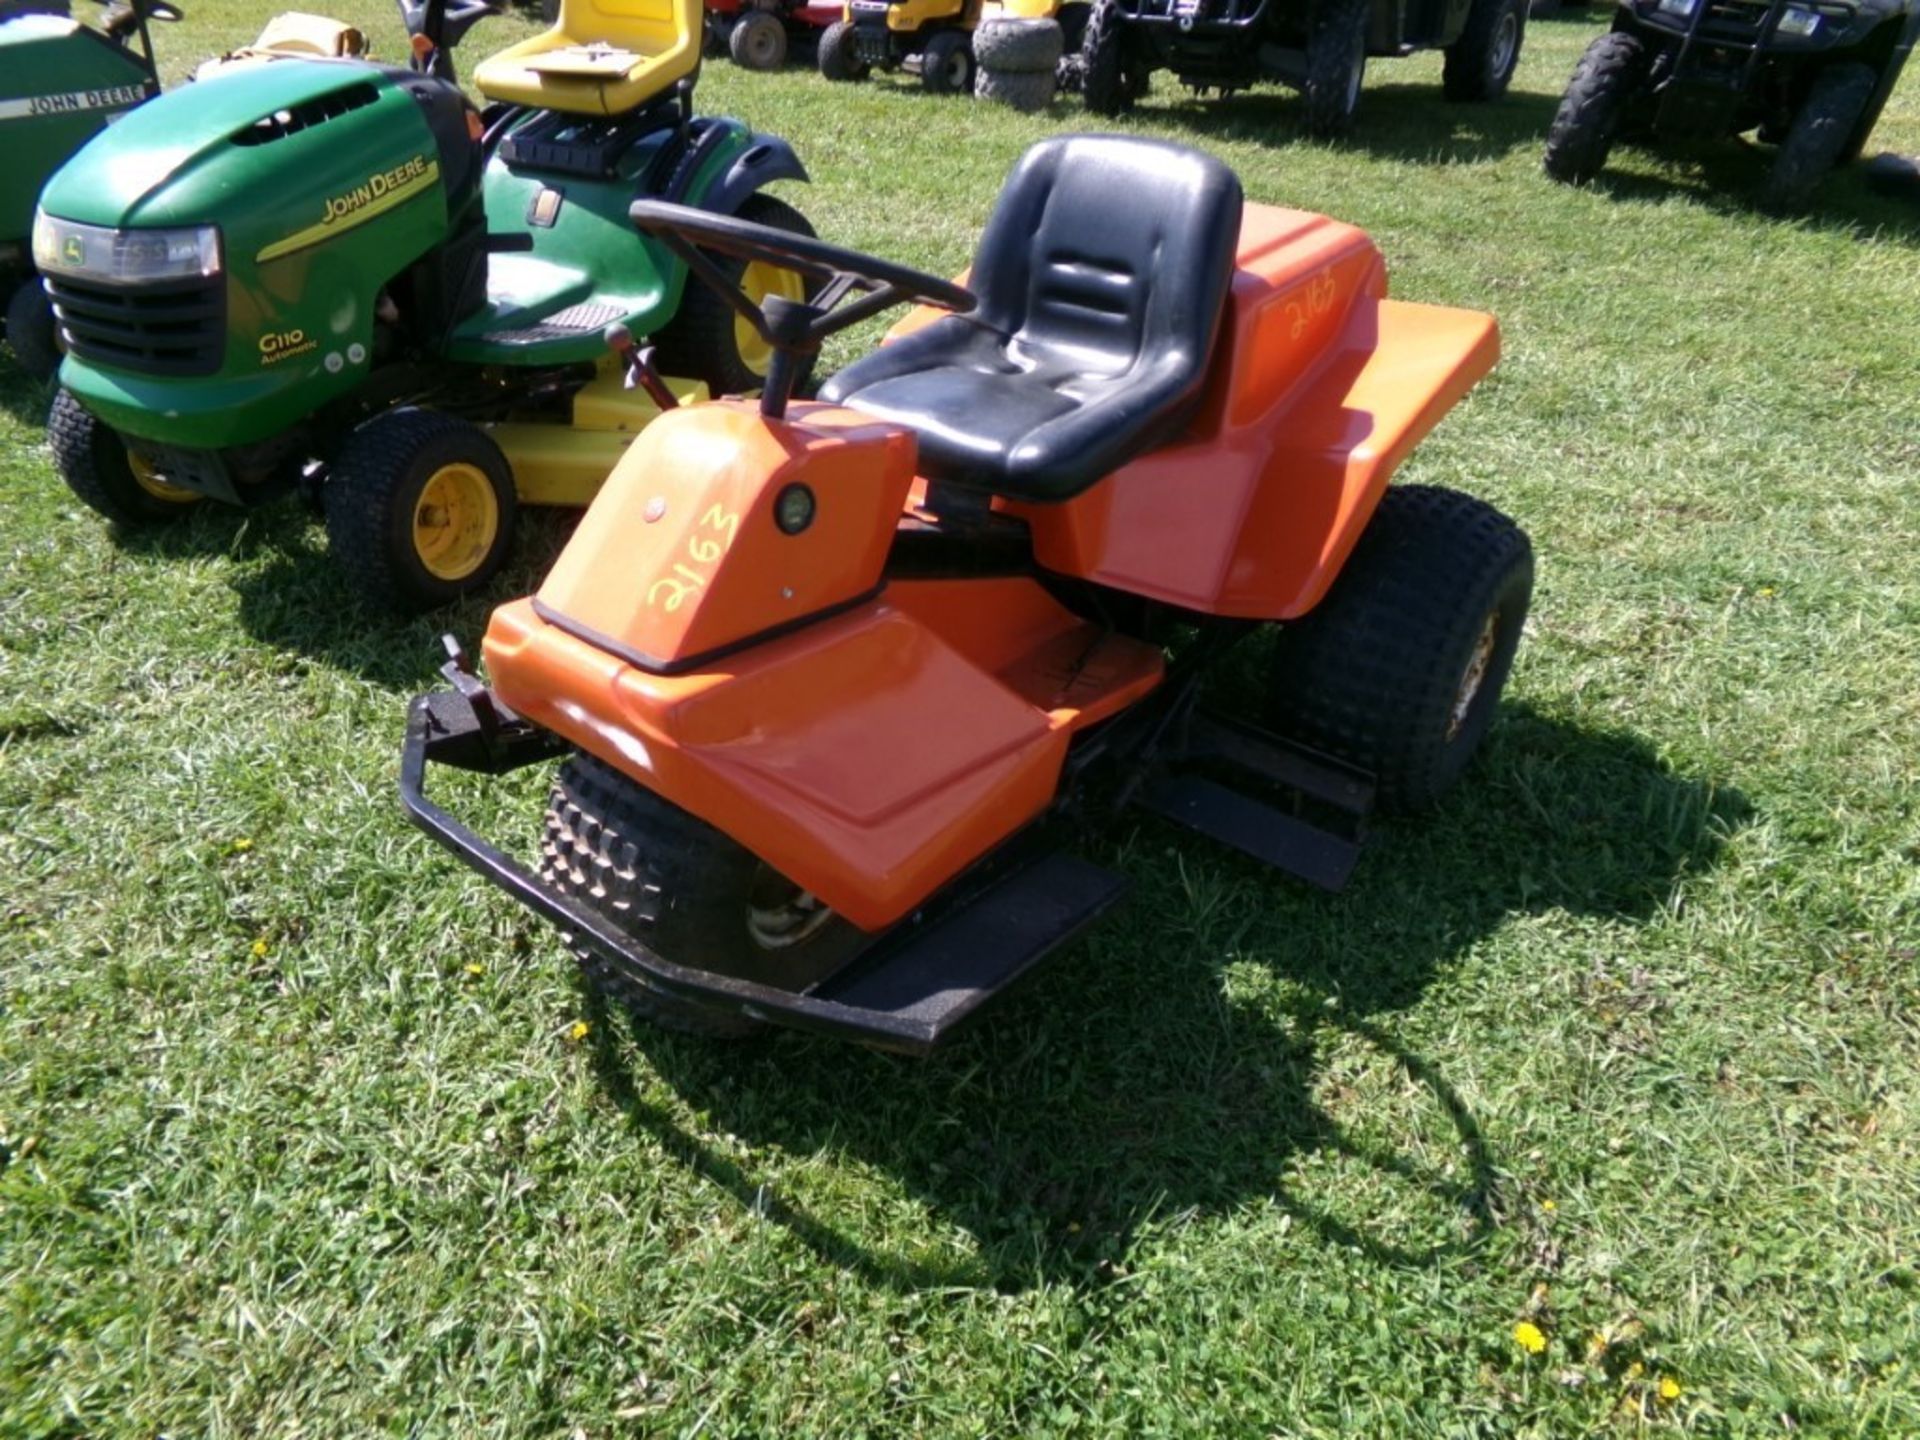 Smithco Golf Coarse Sand Pit/Baseball Infield Groomer with 3 Spd. Briggs and Stratton Engine (5977)